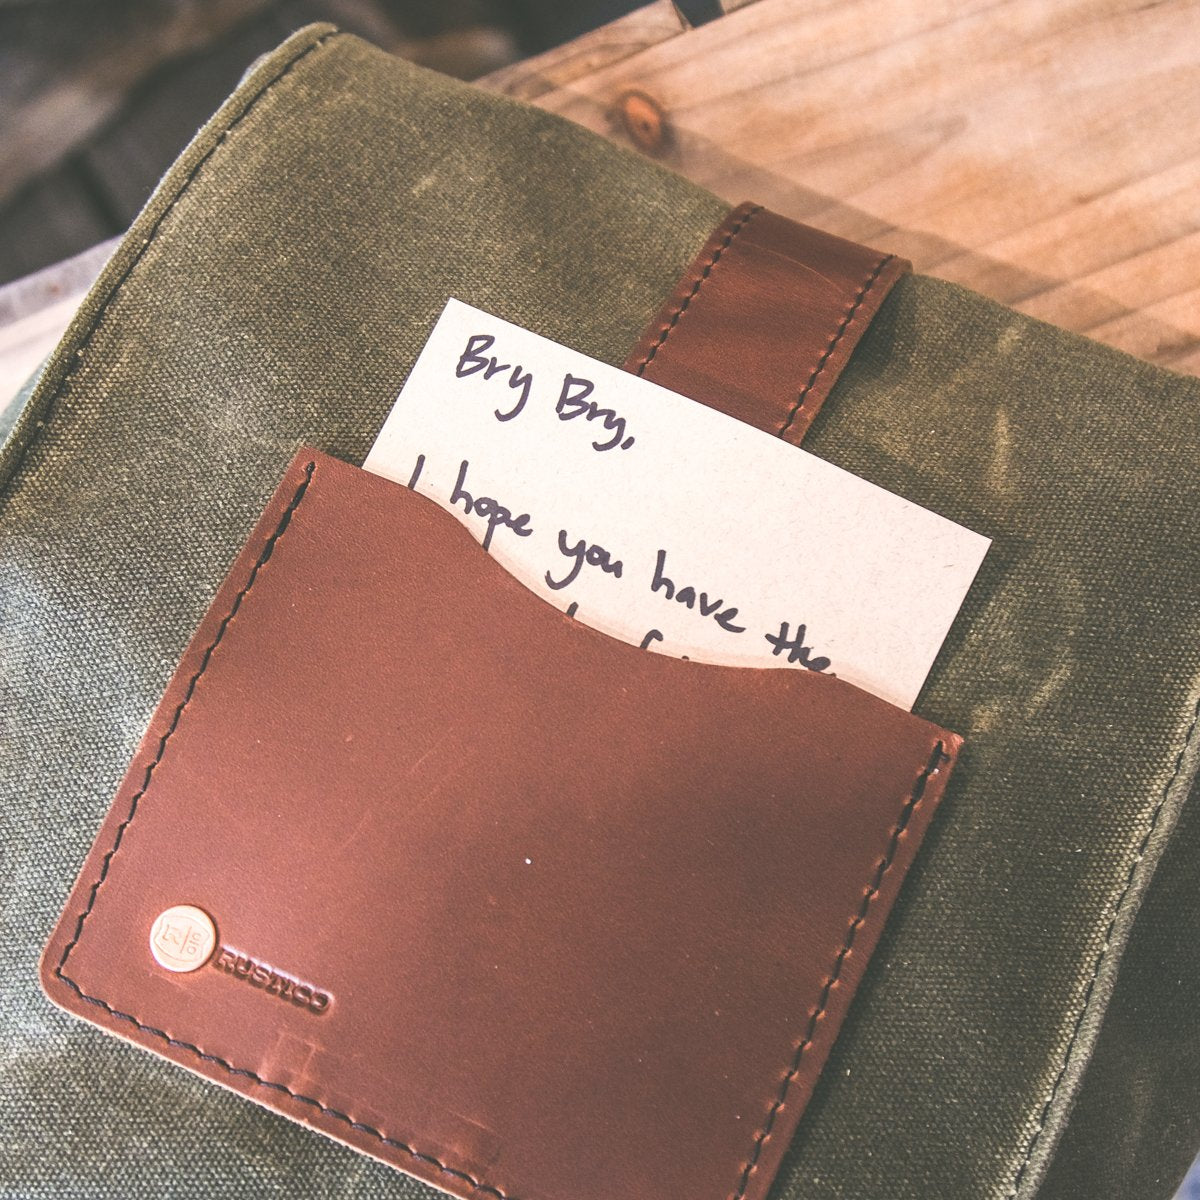 Waxed Canvas and Leather Lunch Bag - Green